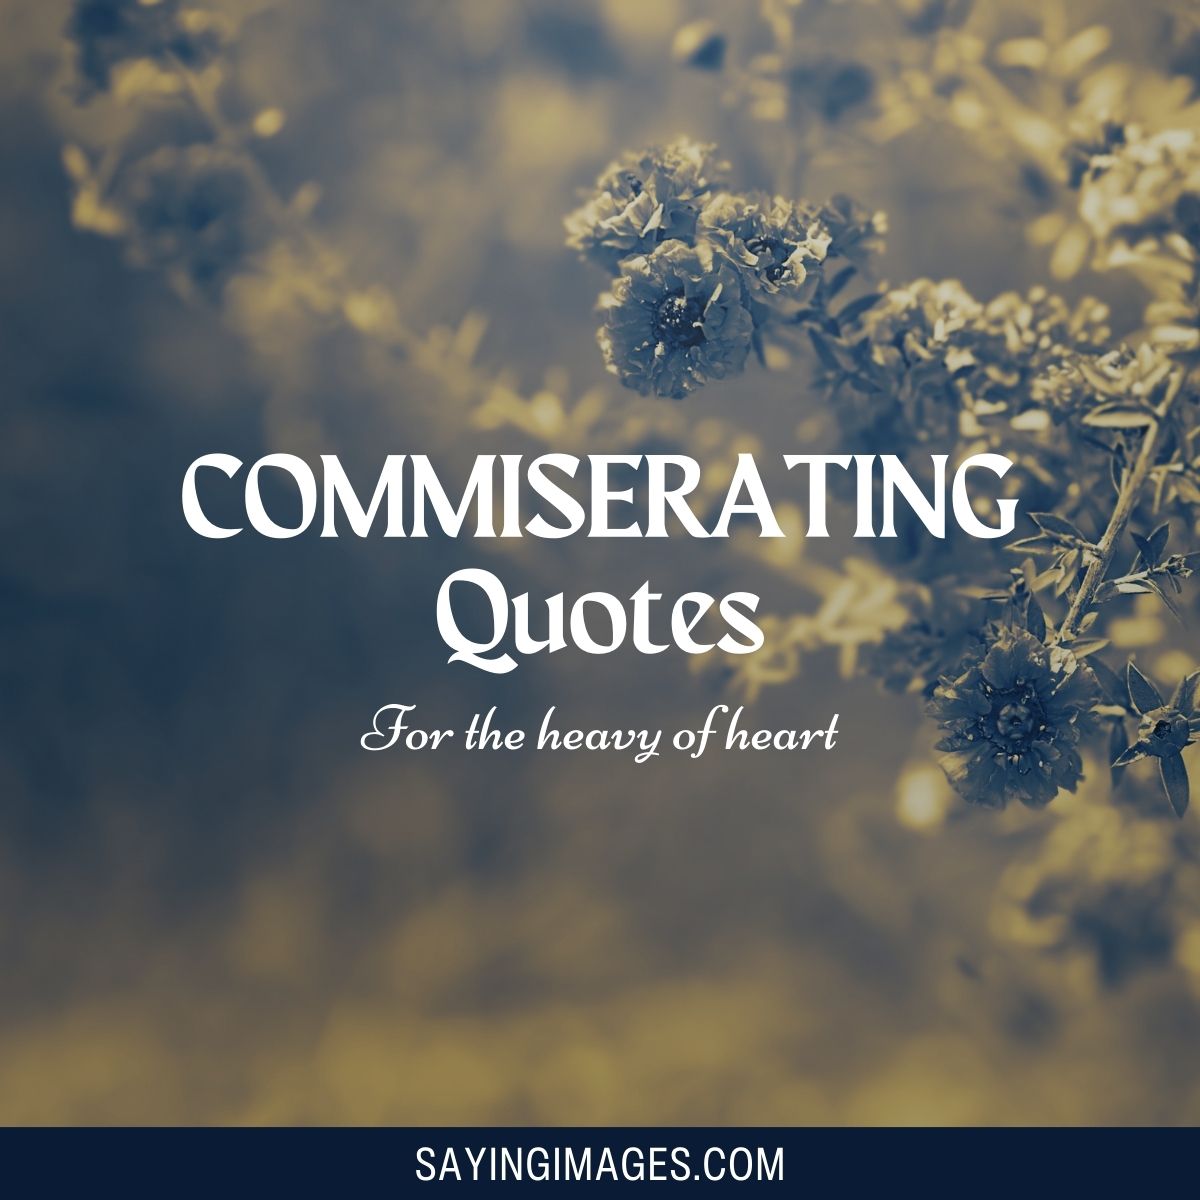 Commiserating Quotes For The Heavy Of Heart